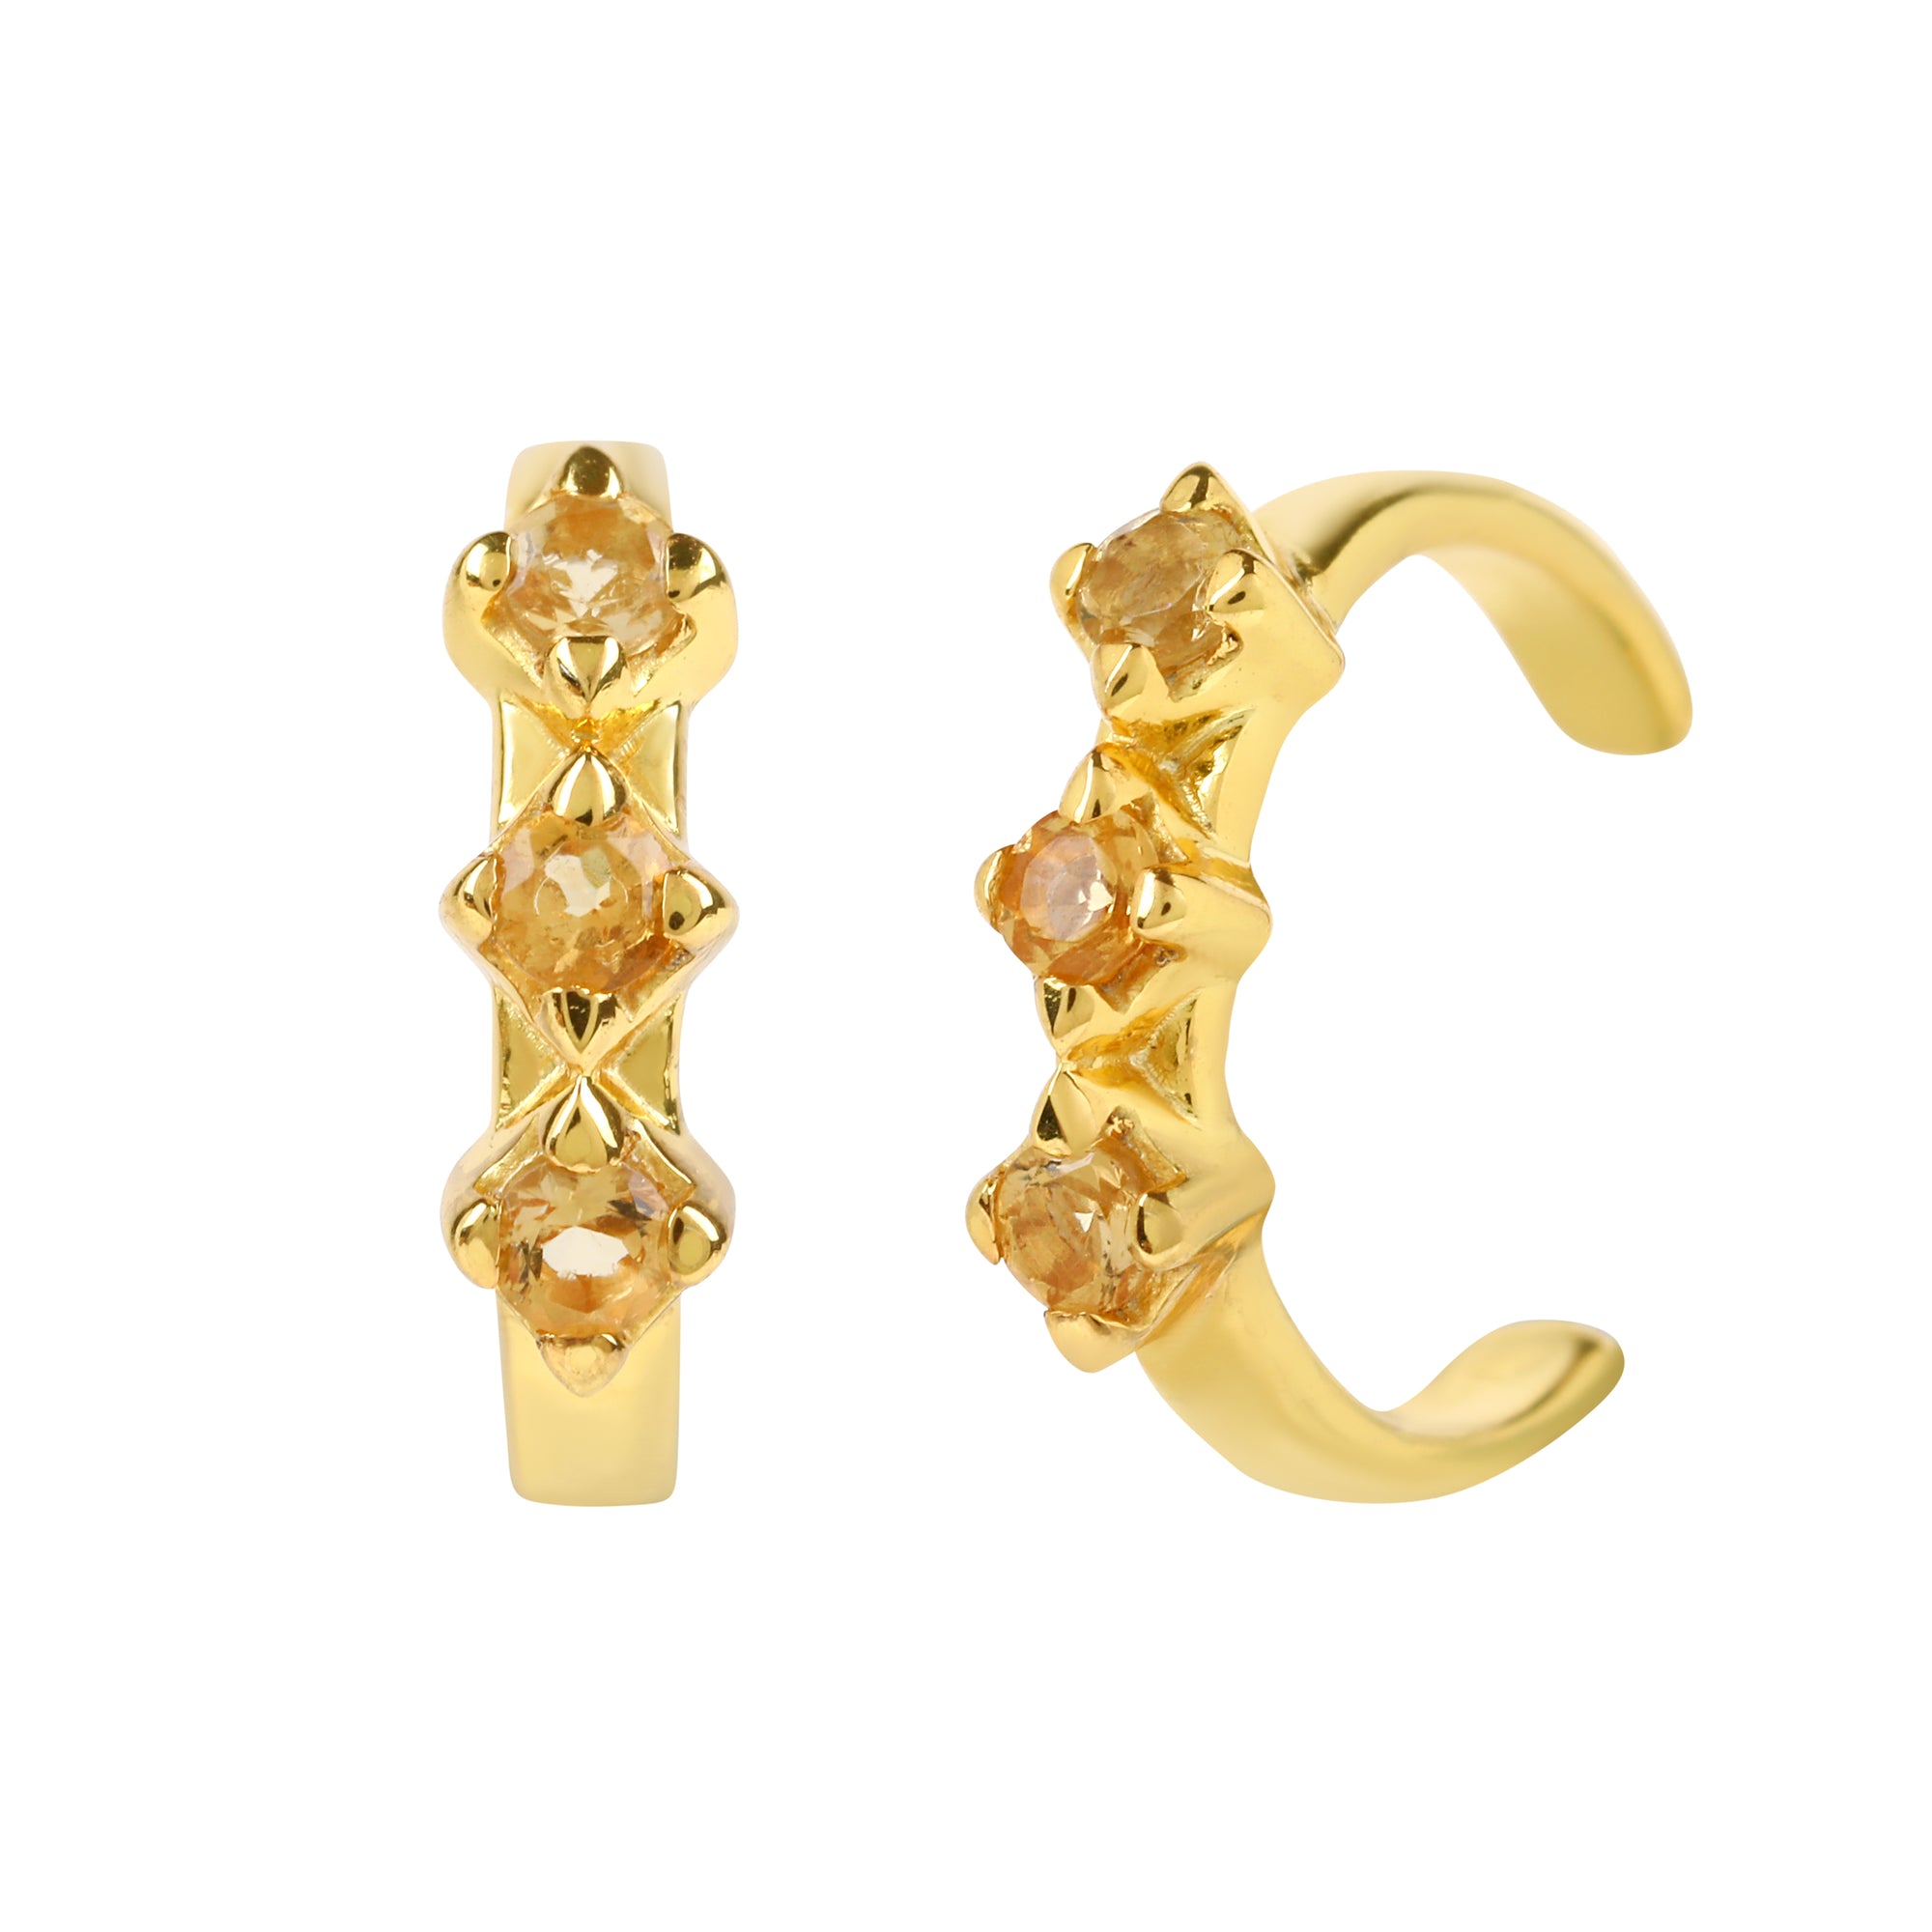 Reconceptions Ear Cuffs - Gold - Yellow